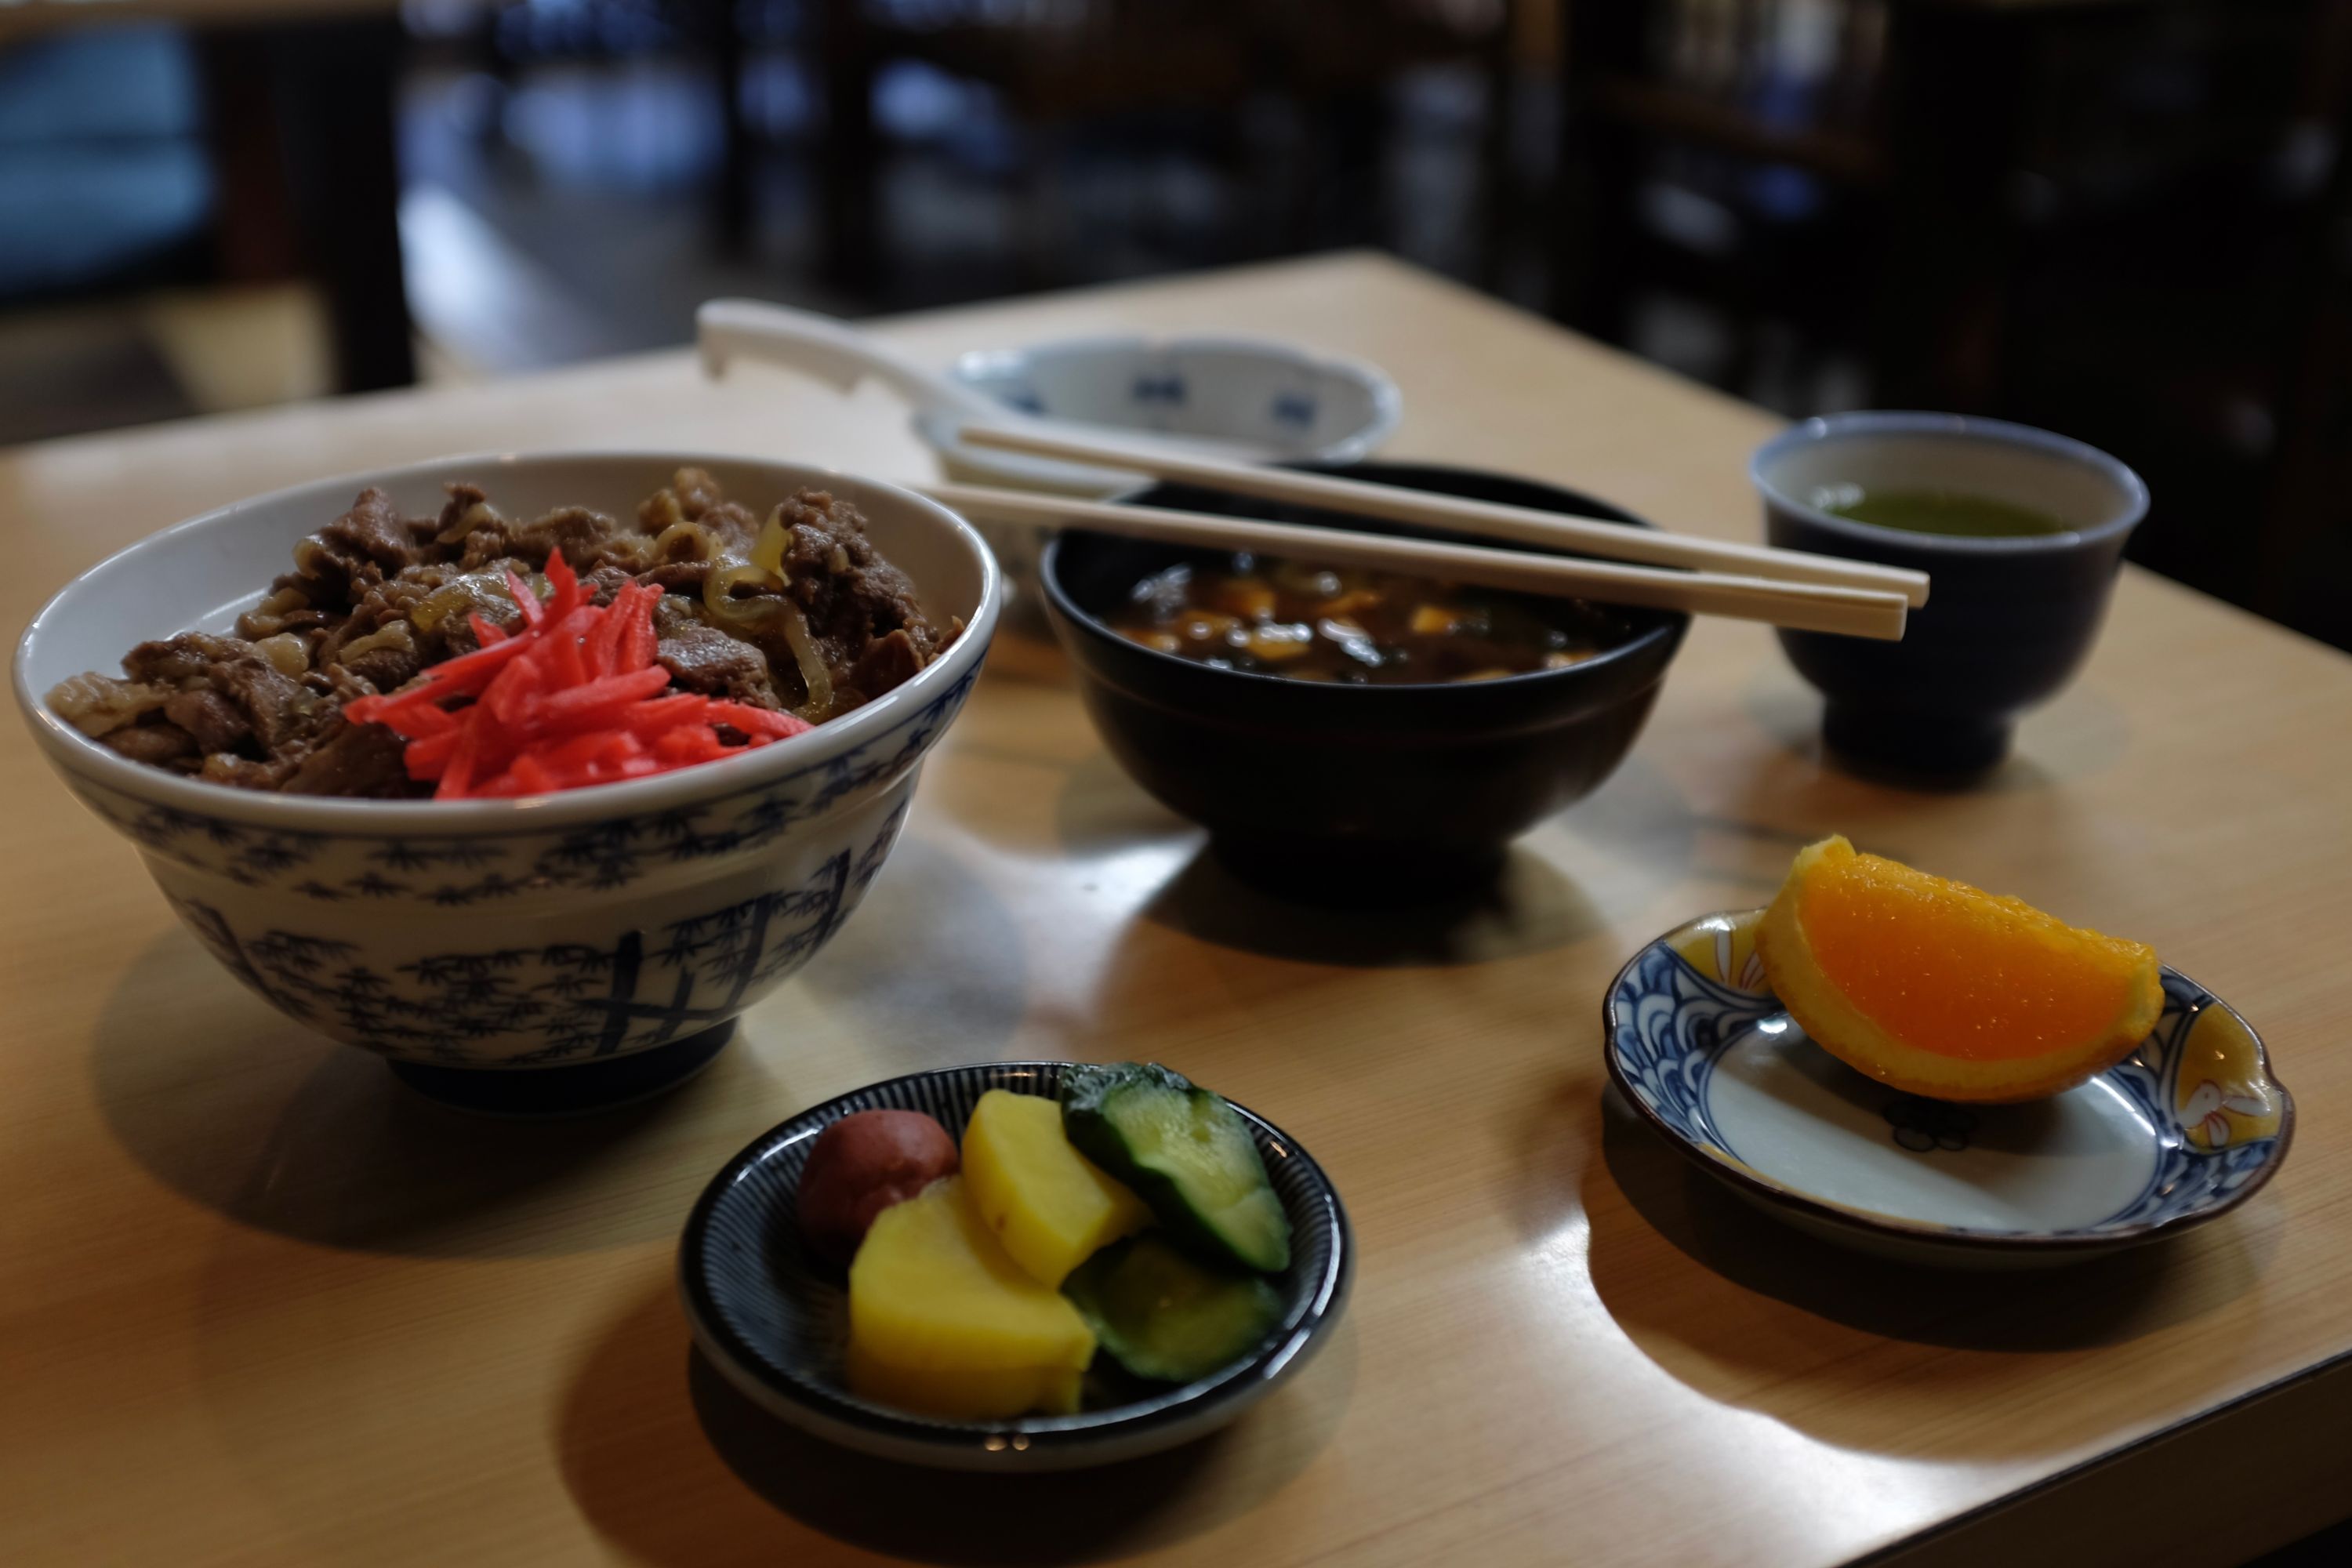 A Japanese breakfast spread on a table in a restaurant.